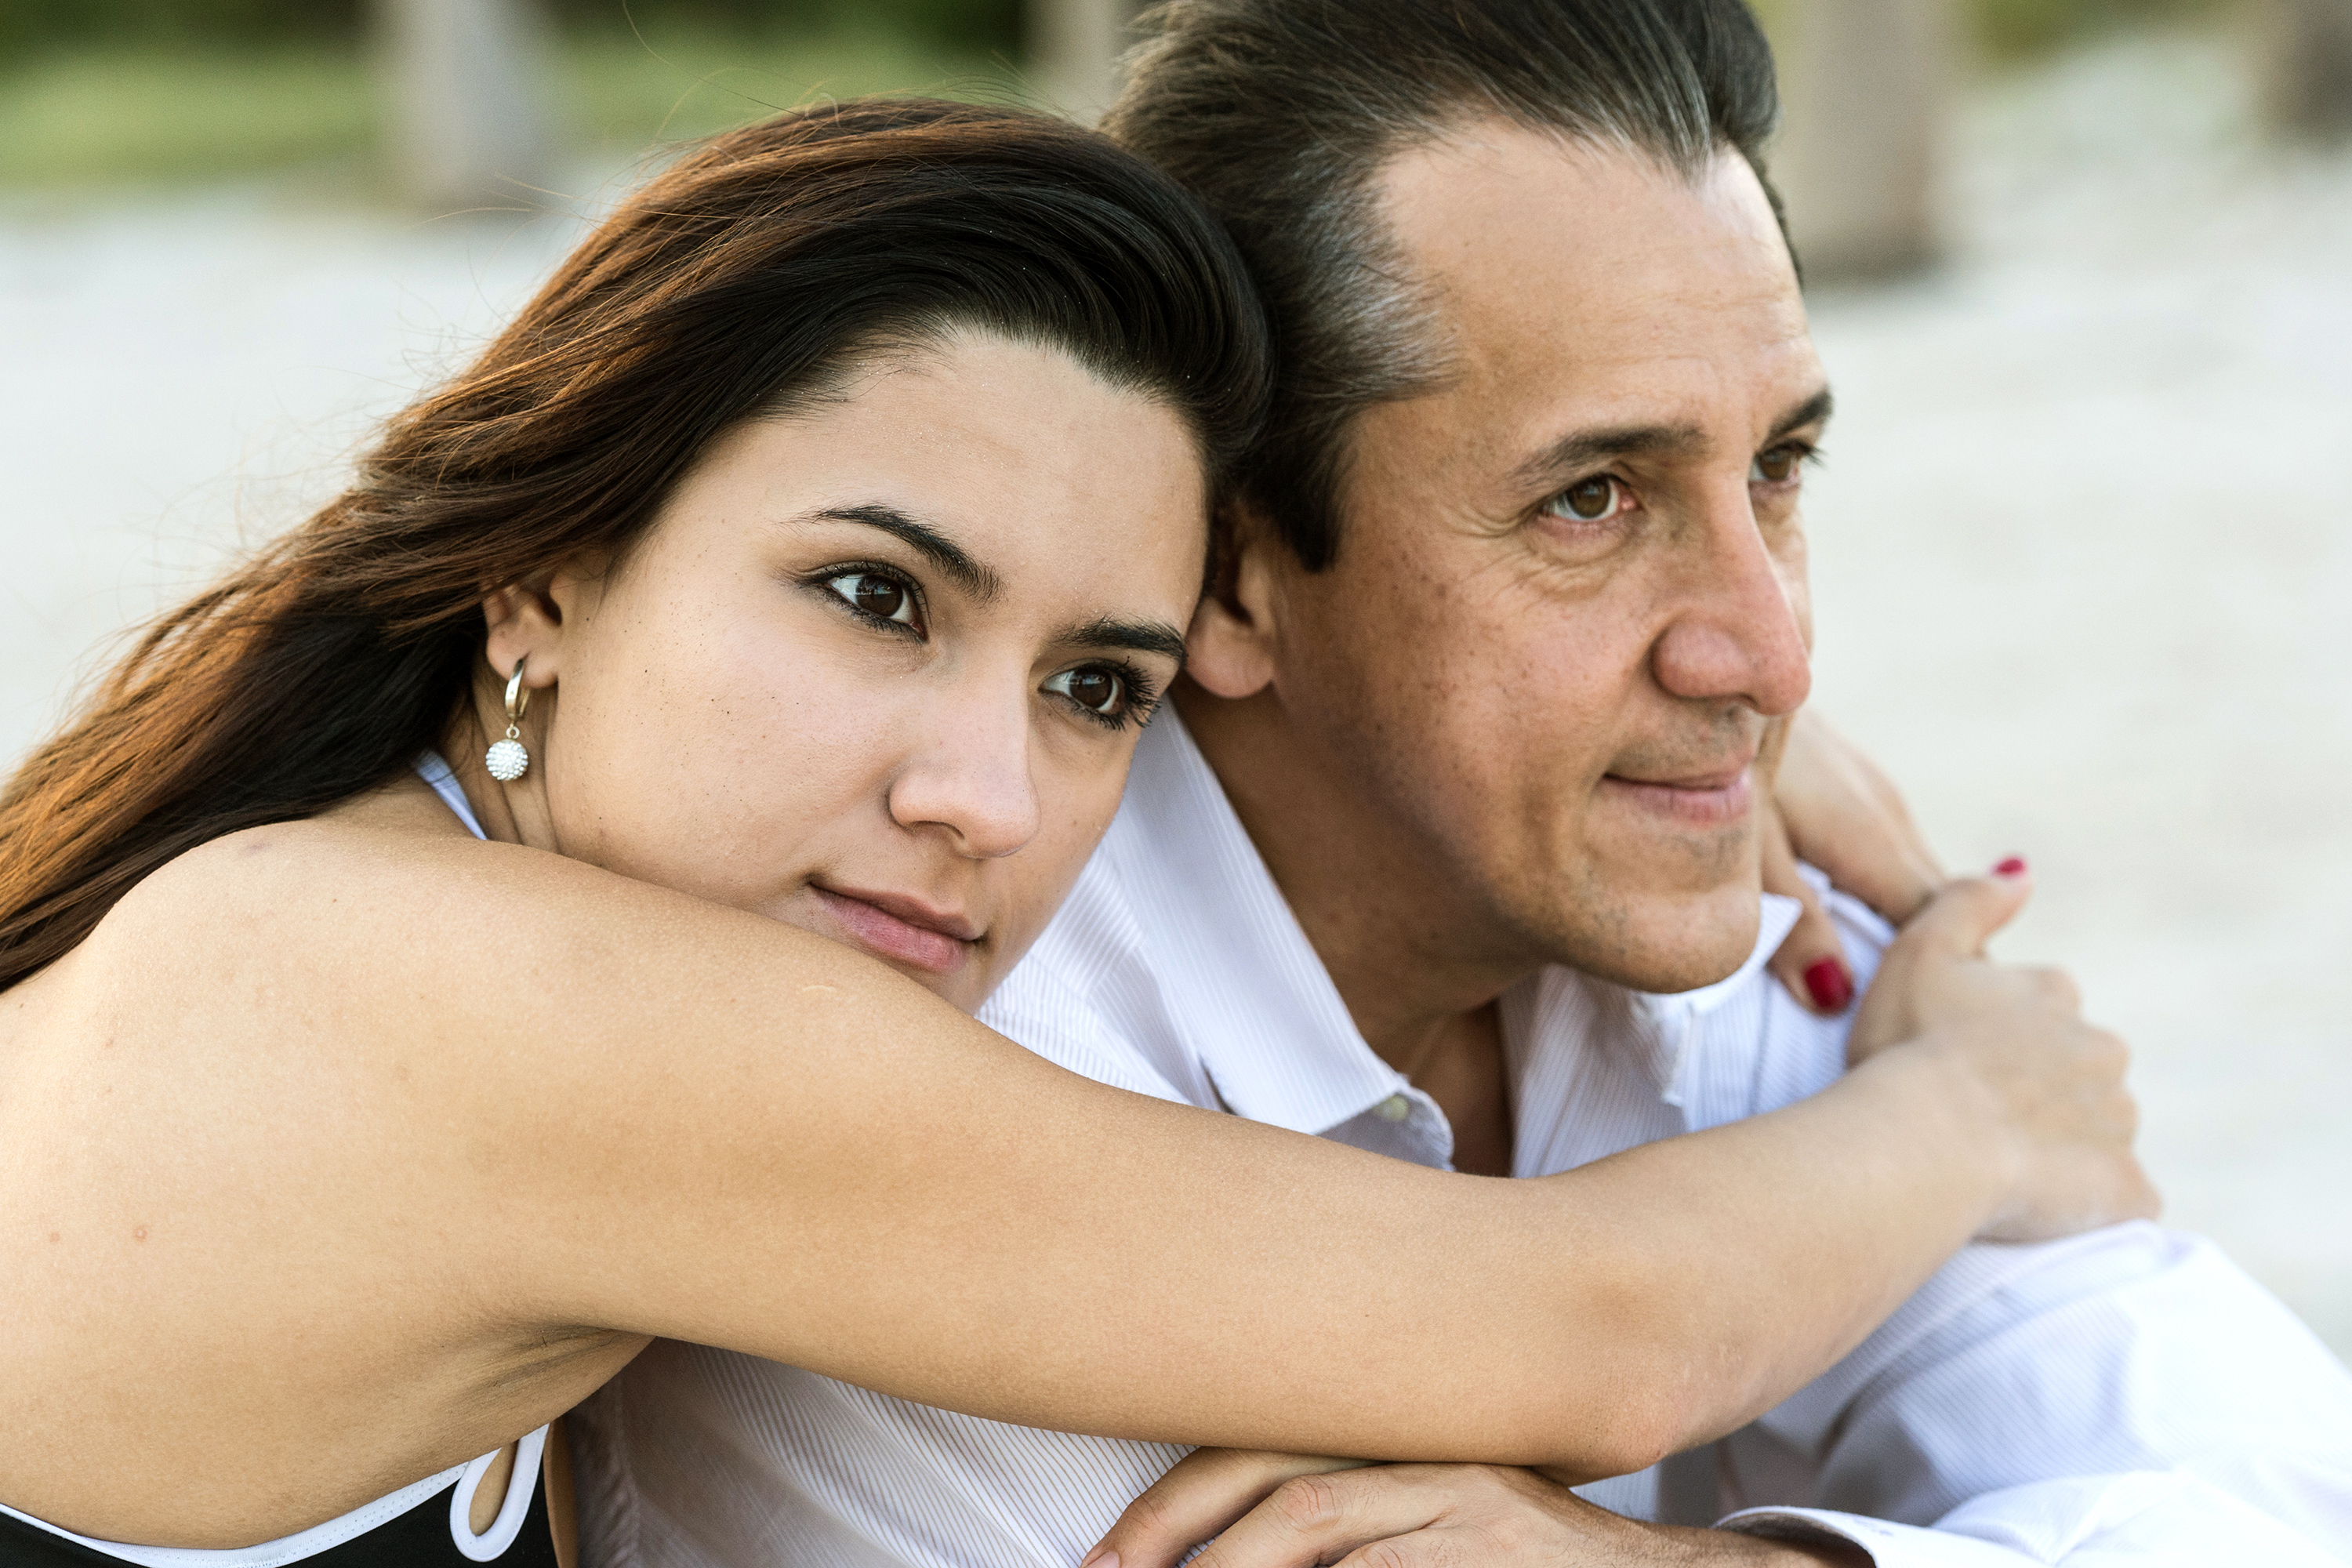 Daddy Issues Causes, Impact and How to Heal pic